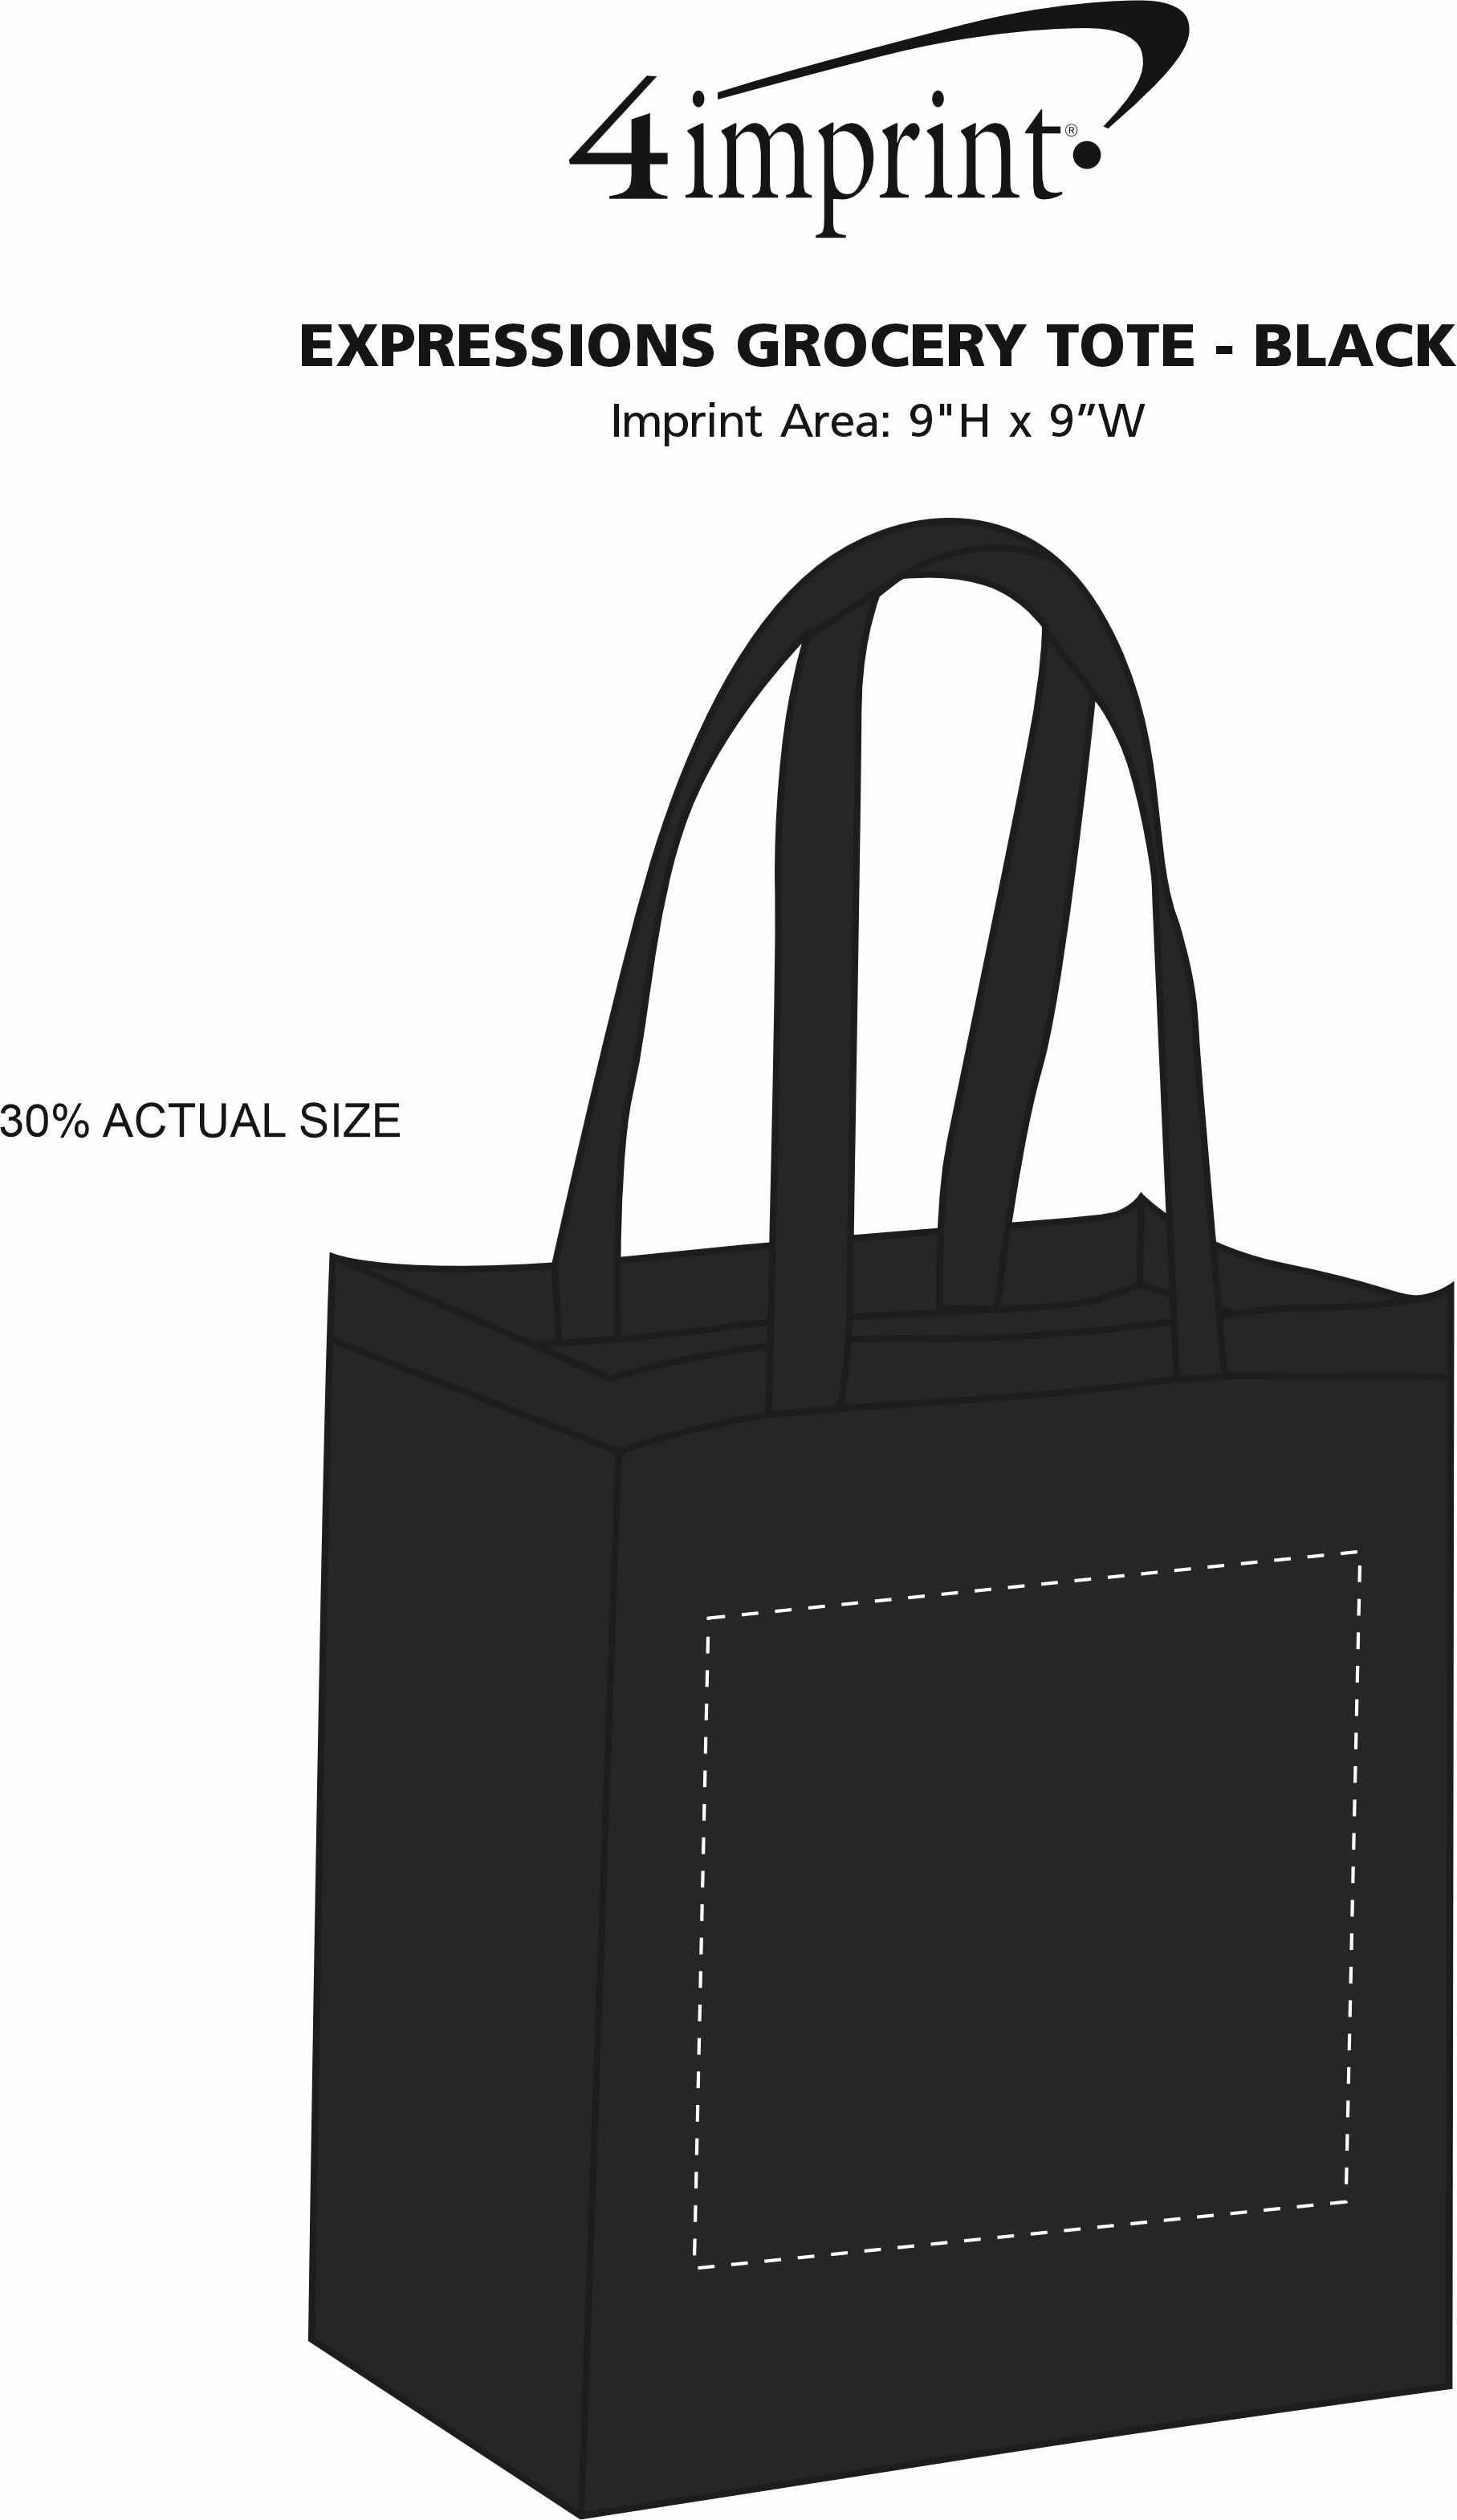 Imprint Area of Expressions Grocery Tote - Black